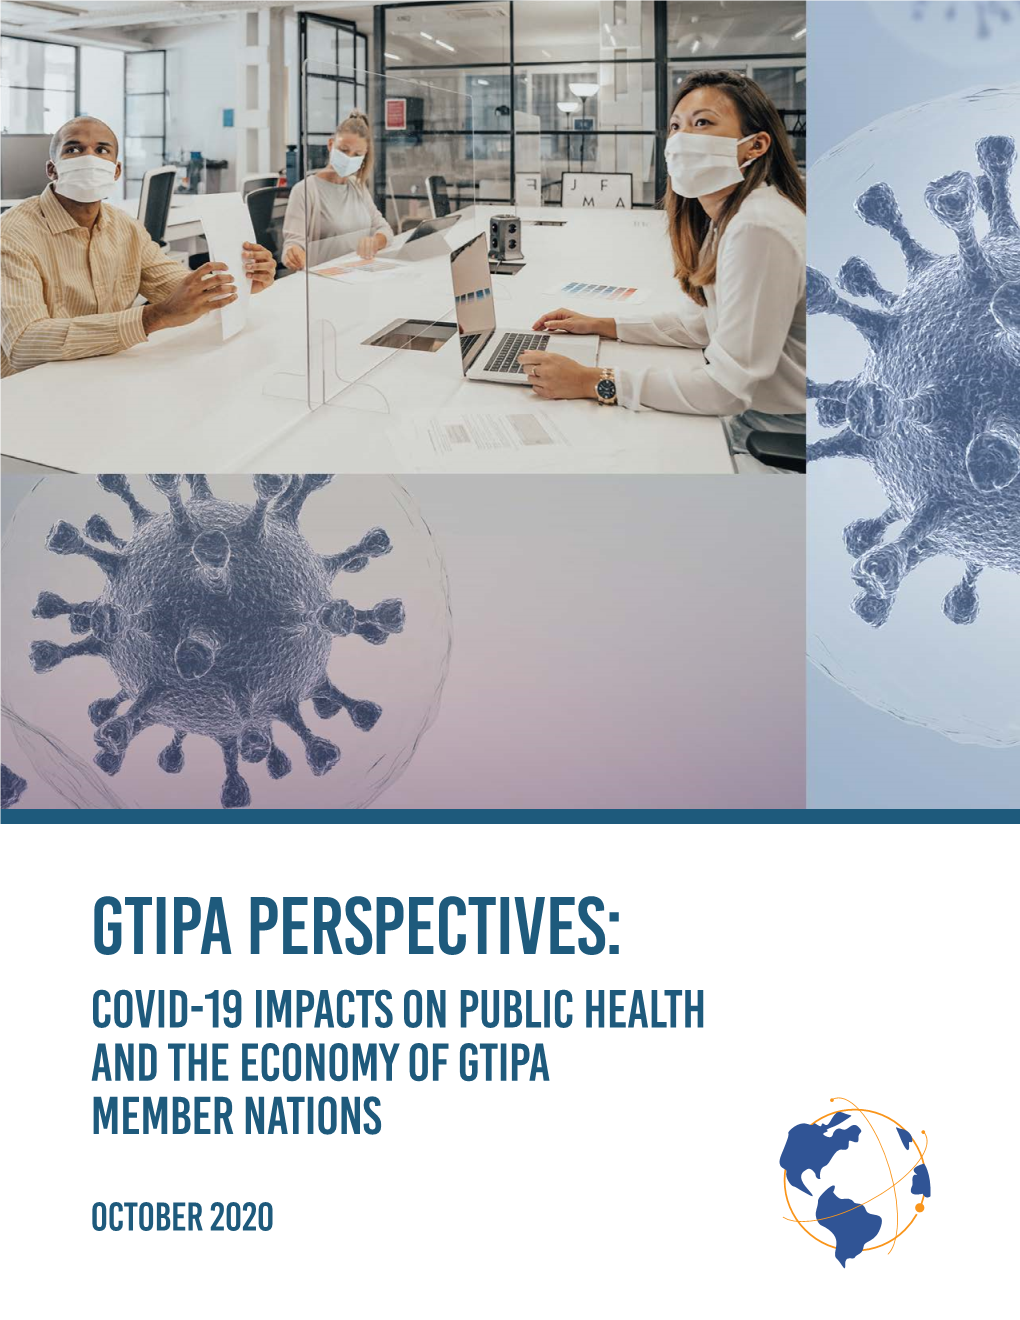 Covid-19 on Public Health and the Economy of GTIPA Member Nations